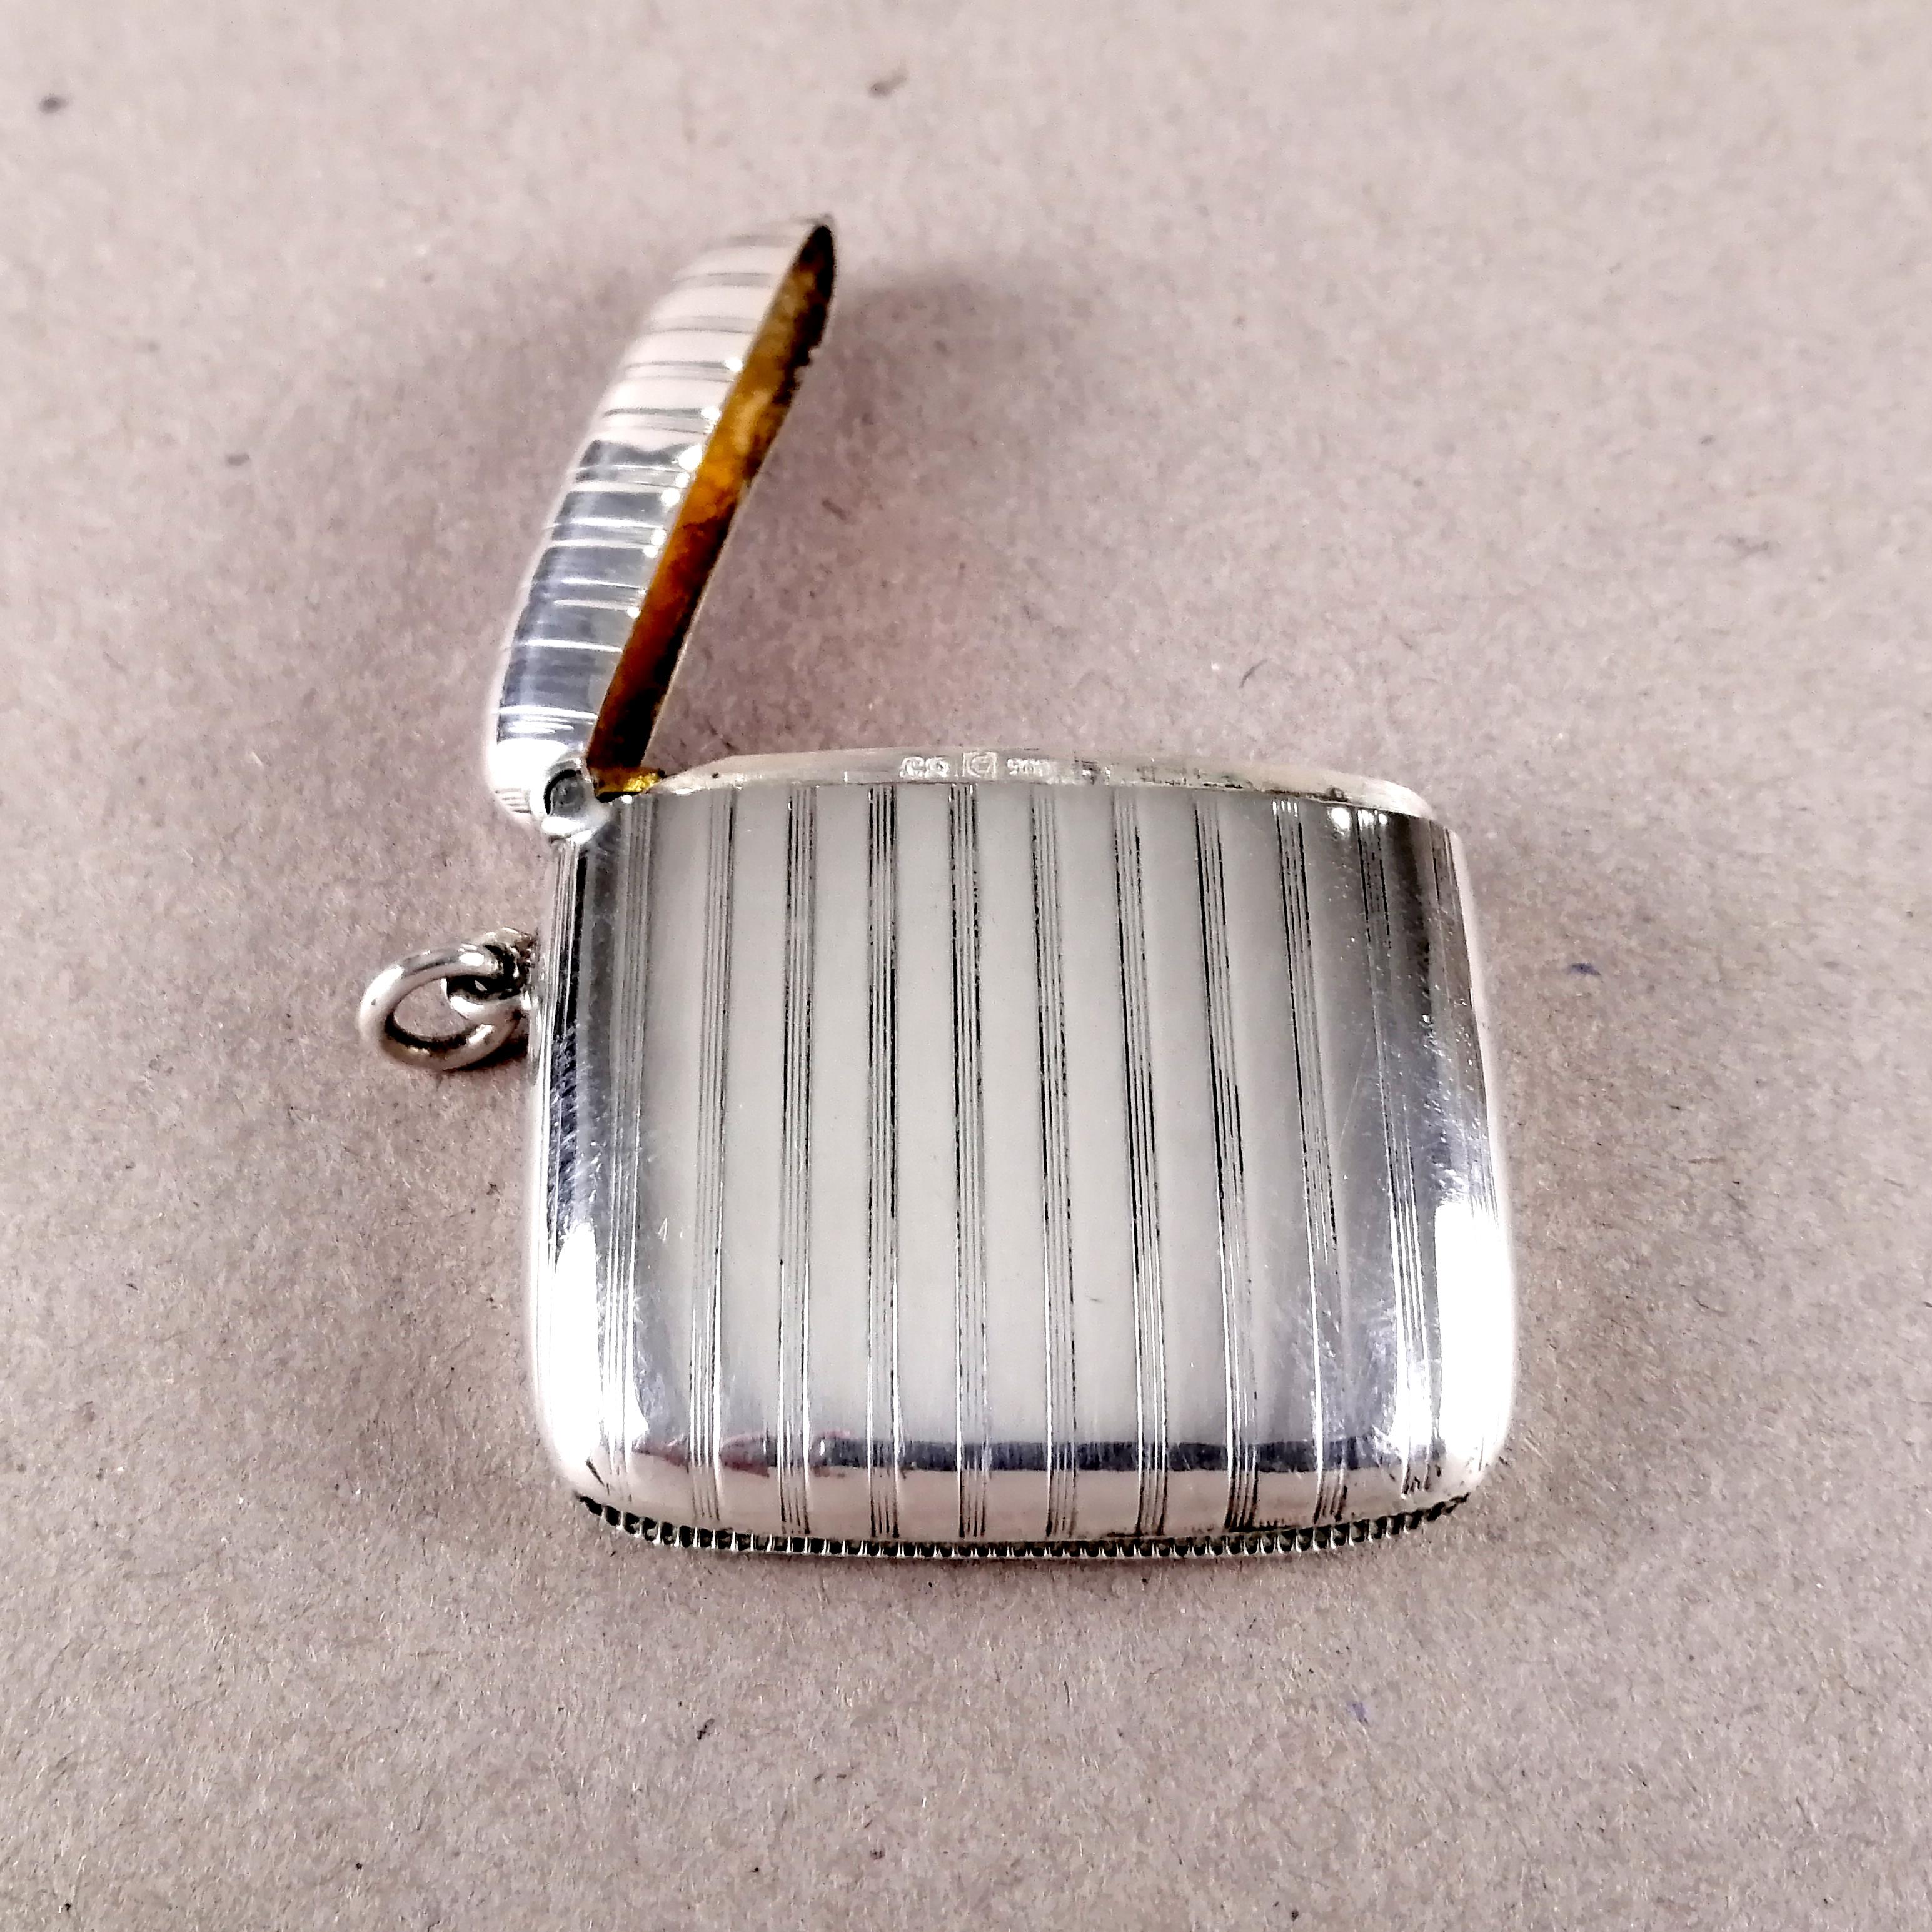 An elegant ca. 1920 Art Deco set of cigarette box and match case in .900 silver by German silversmith Louis Kuppenheim (active 1900 - 1940). The curved design shows ribbed lines. The box's interior shows gilded interior. Sealed 